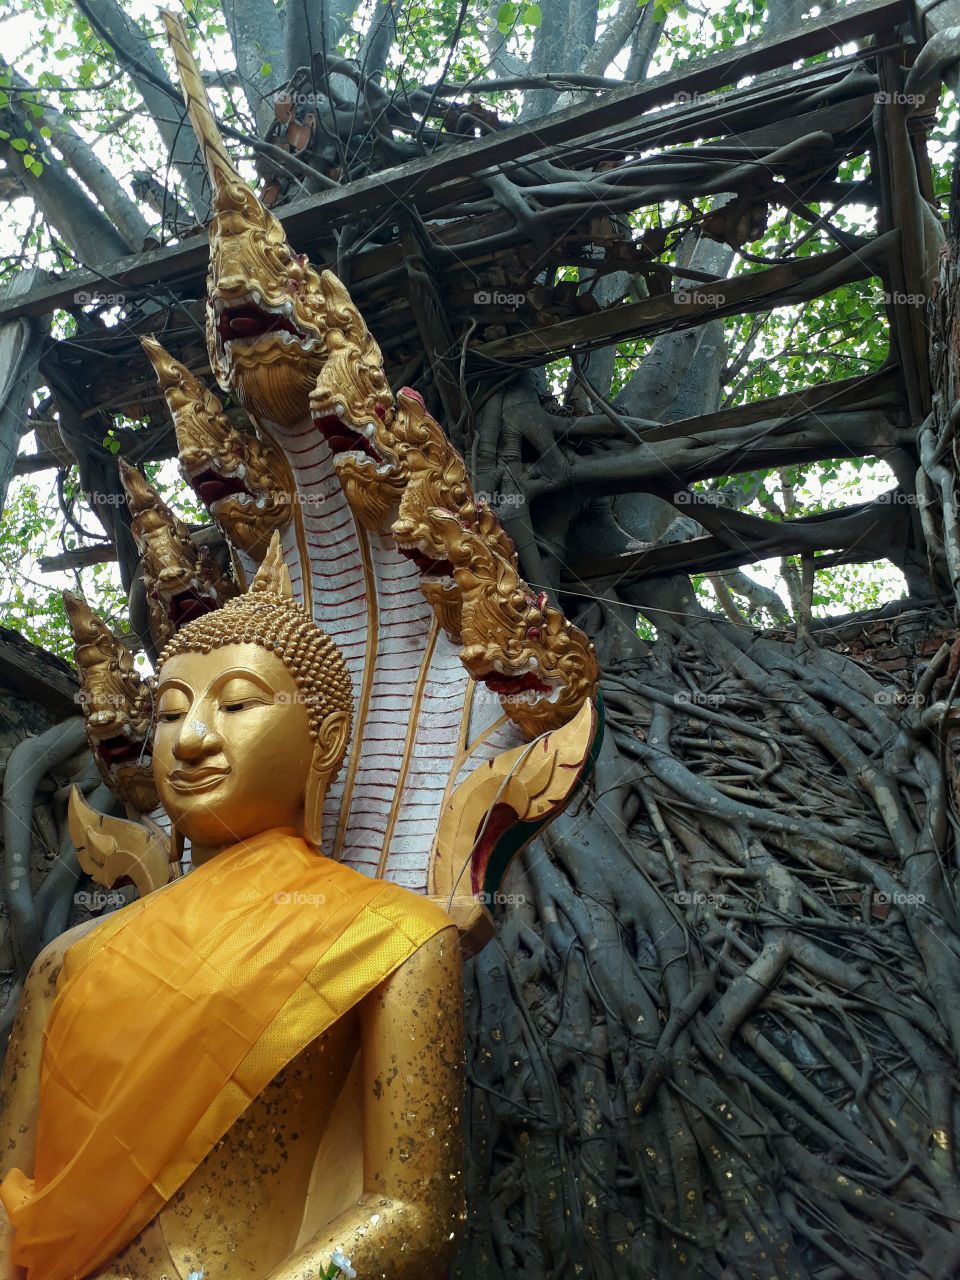 amazing ruins of buddish temple which is survived by trees. Thailand.